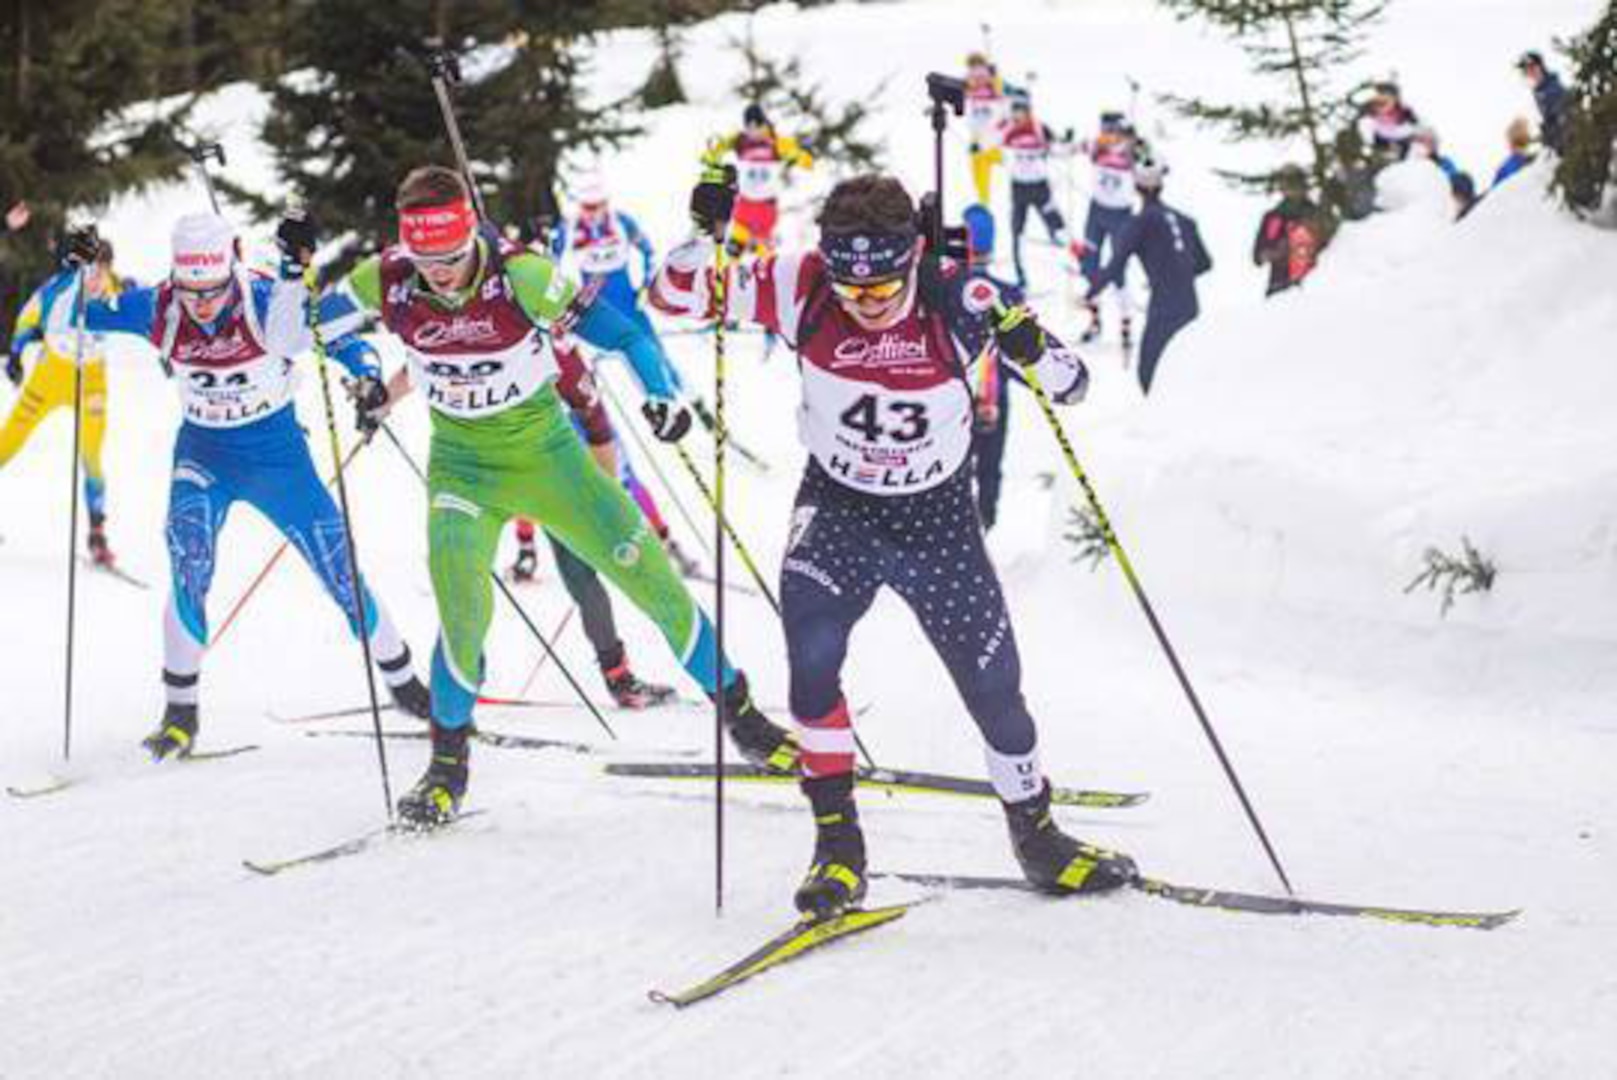 U.S. Army Spc. Vasek Cervenka, a carpentry and masonry Specialist assigned to Detachment 1, Headquarters and Headquarters Company, Garrison Support Command, Vermont National Guard, competing in the 12.5 KM Pursuit Race at the 2021 Junior World Championships in Obertilliach, Austria,  March 3, 2021. Cervenka was selected as an alternate to the men's team for the 2022 Olympics in Beijing, China.